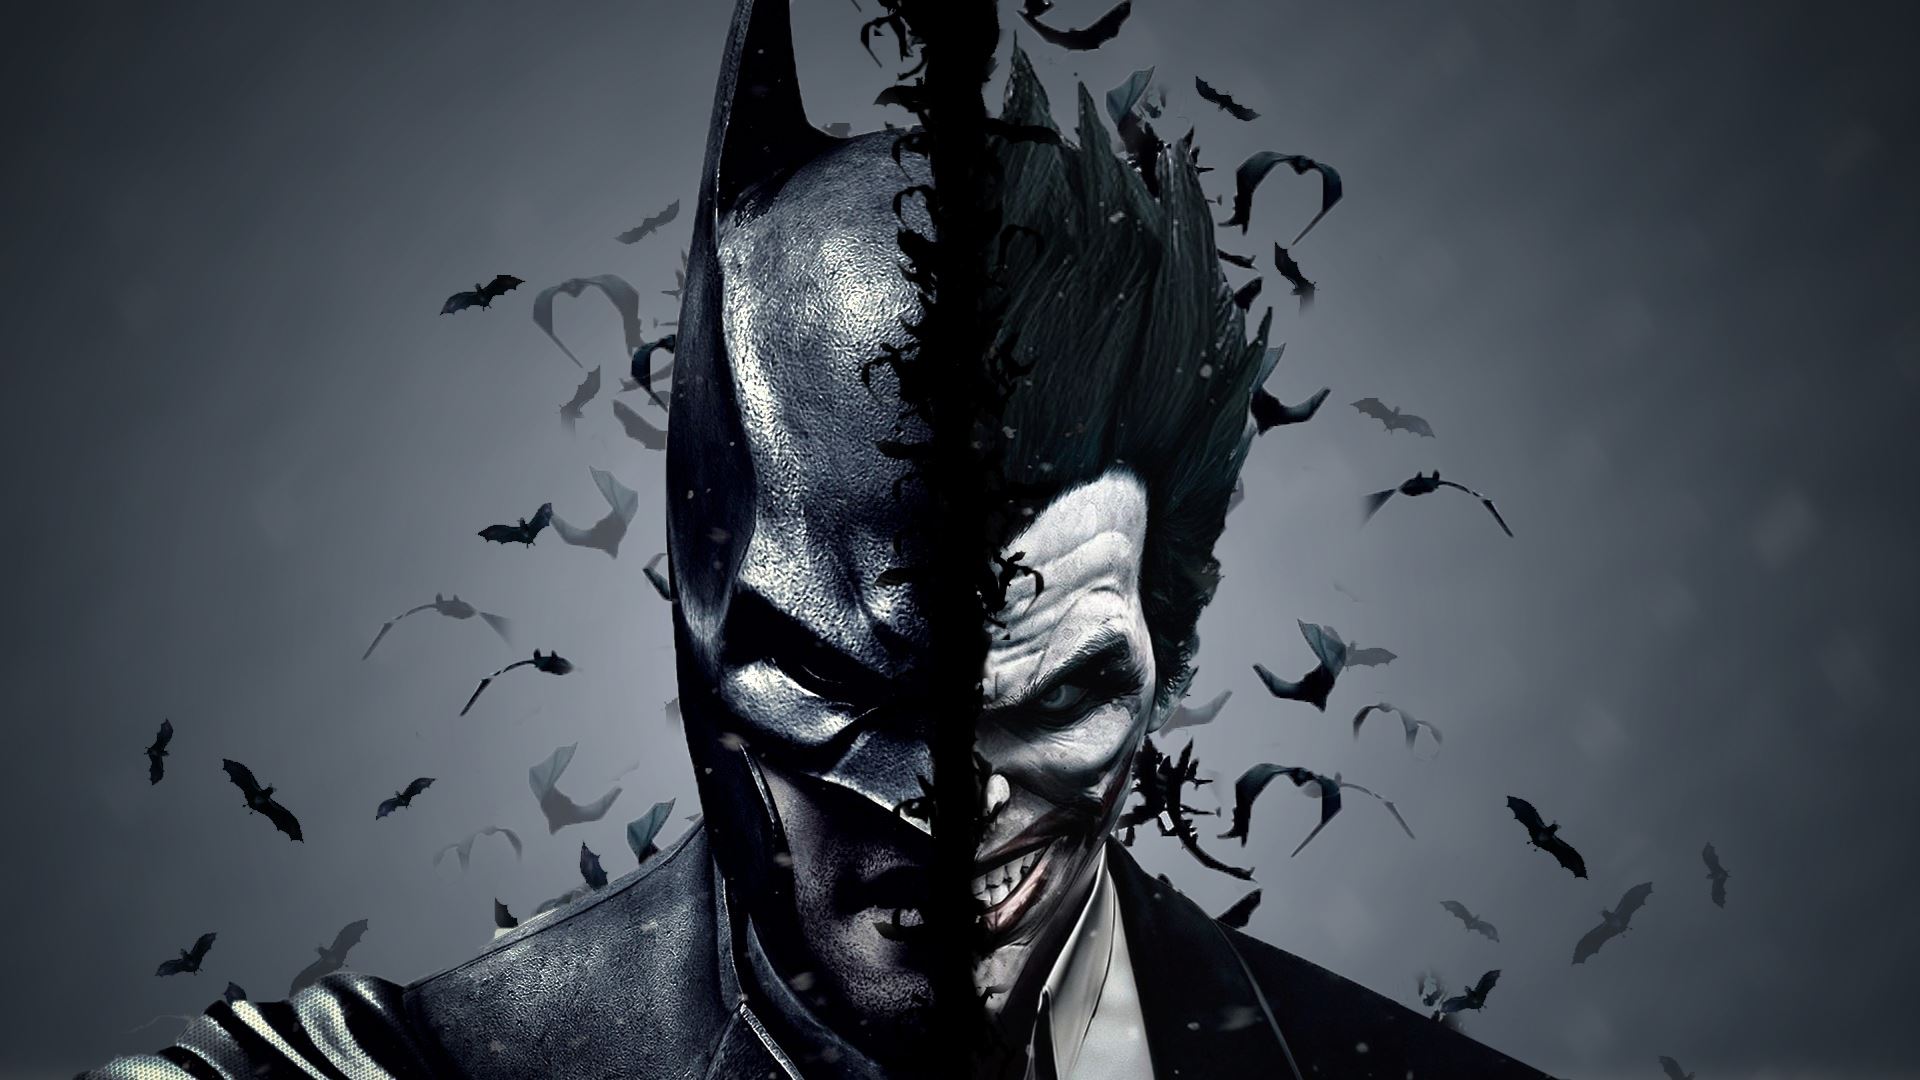 Batman and Joker • Images • WallpaperFusion by Binary Fortress Software